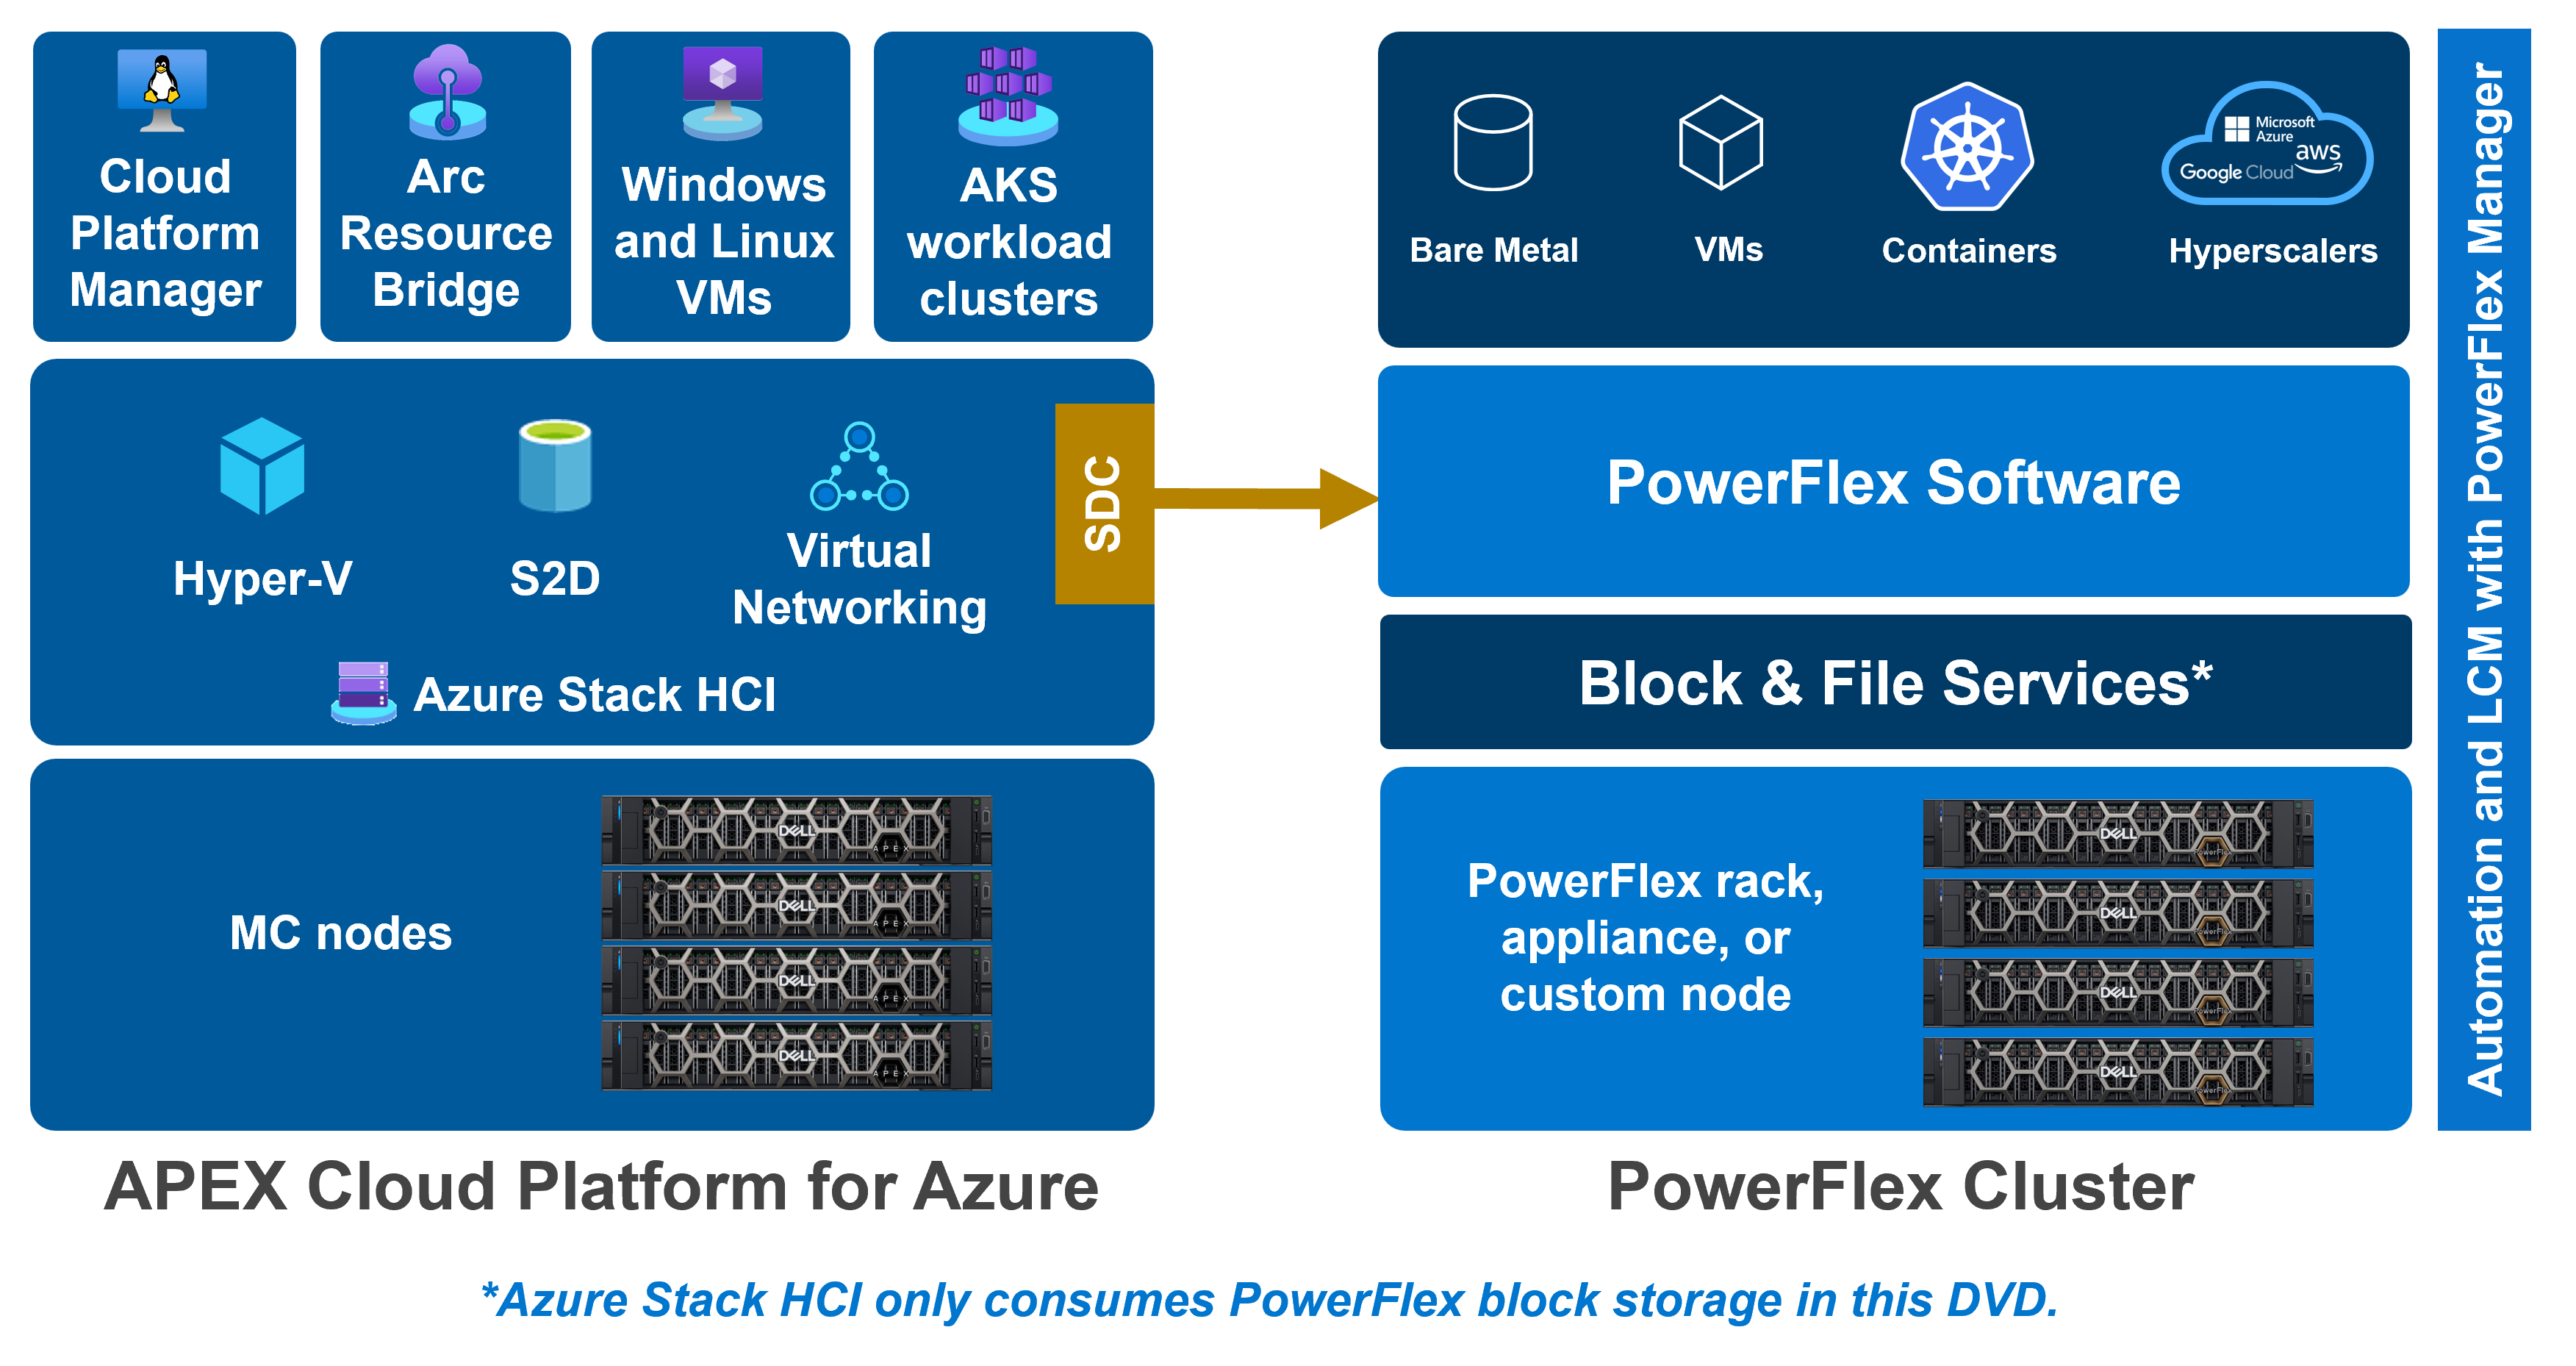 The Azure Stack HCI and PowerFlex clusters are shown as two separate systems.